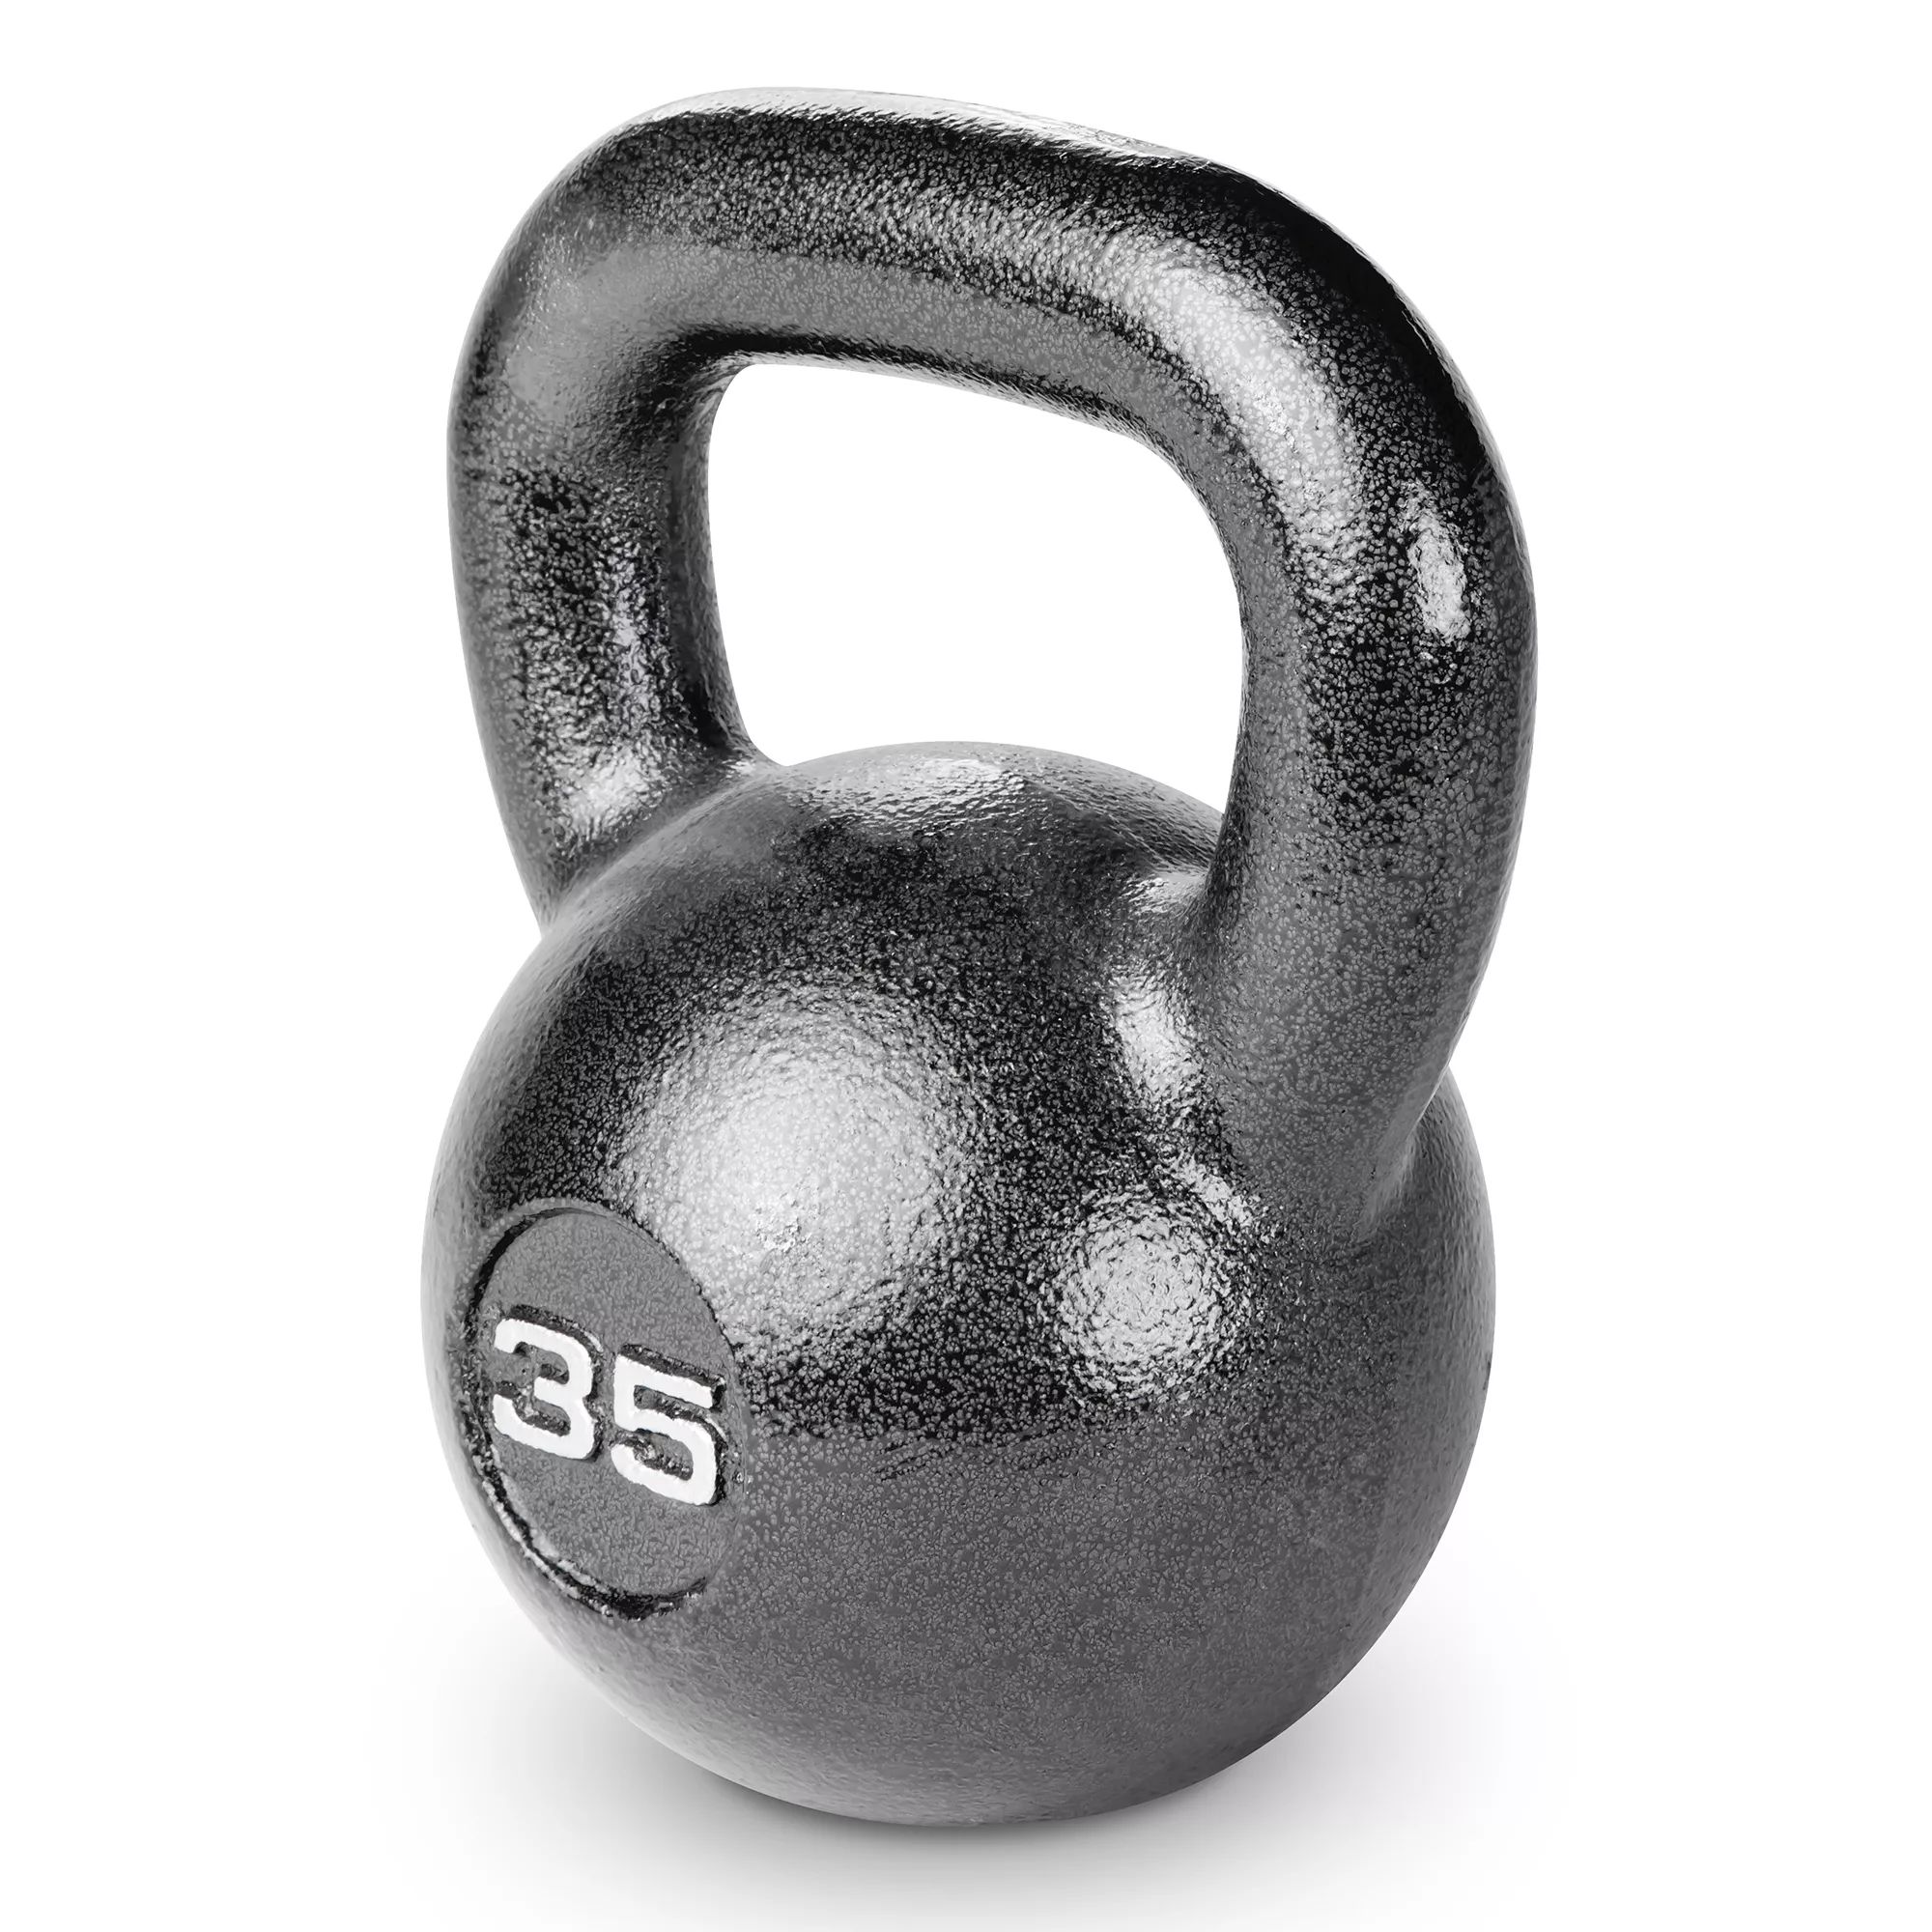 Marcy 35lb. Kettle Bell | Dick's Sporting Goods